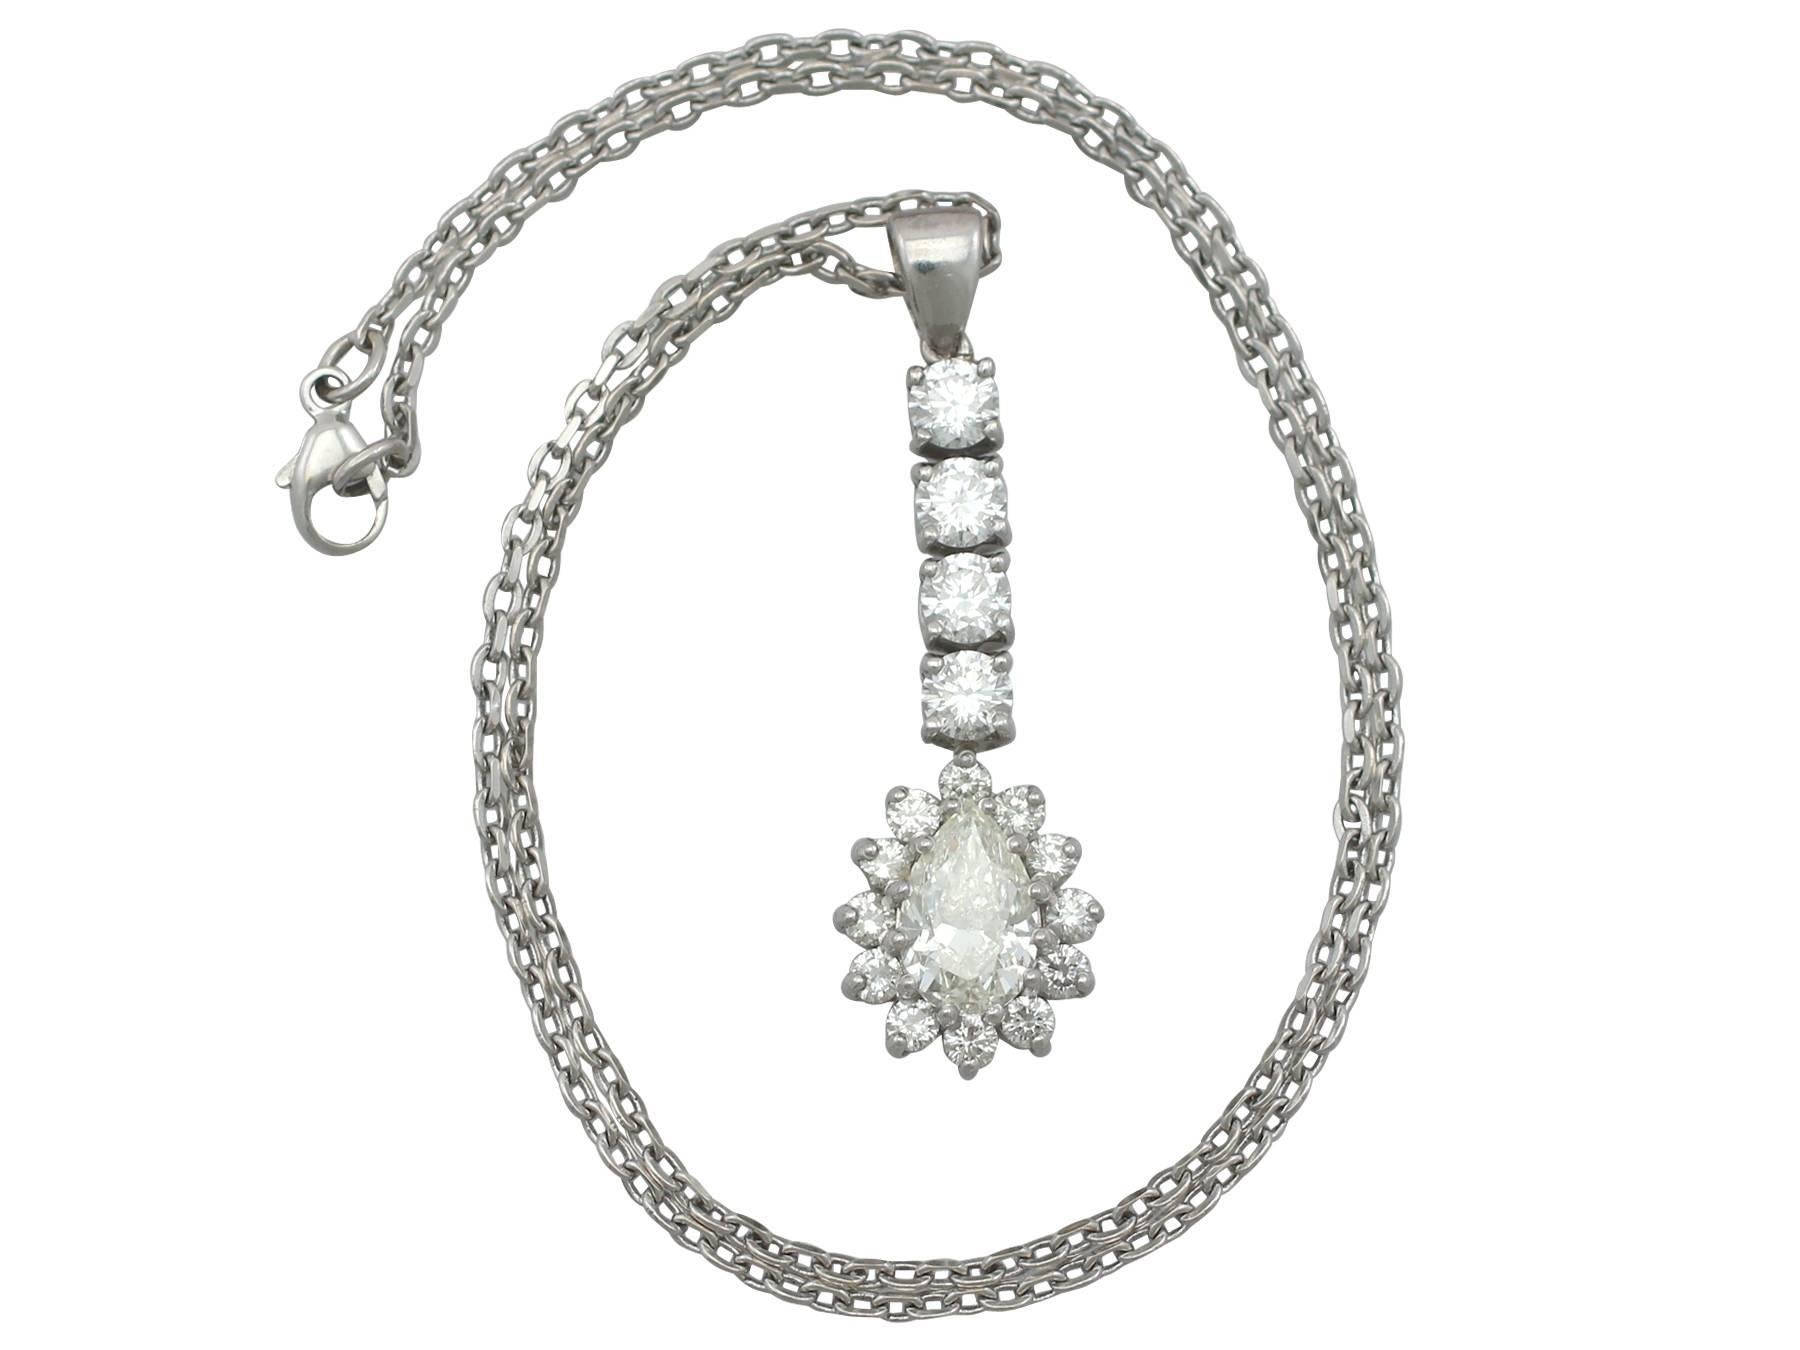 A stunning, fine and impressive contemporary 4.13 carat diamond and 18 karat white gold pendant; part of our diverse contemporary jewelry collection

This stunning contemporary diamond cluster pendant has been crafted in 18k white gold.

The feature